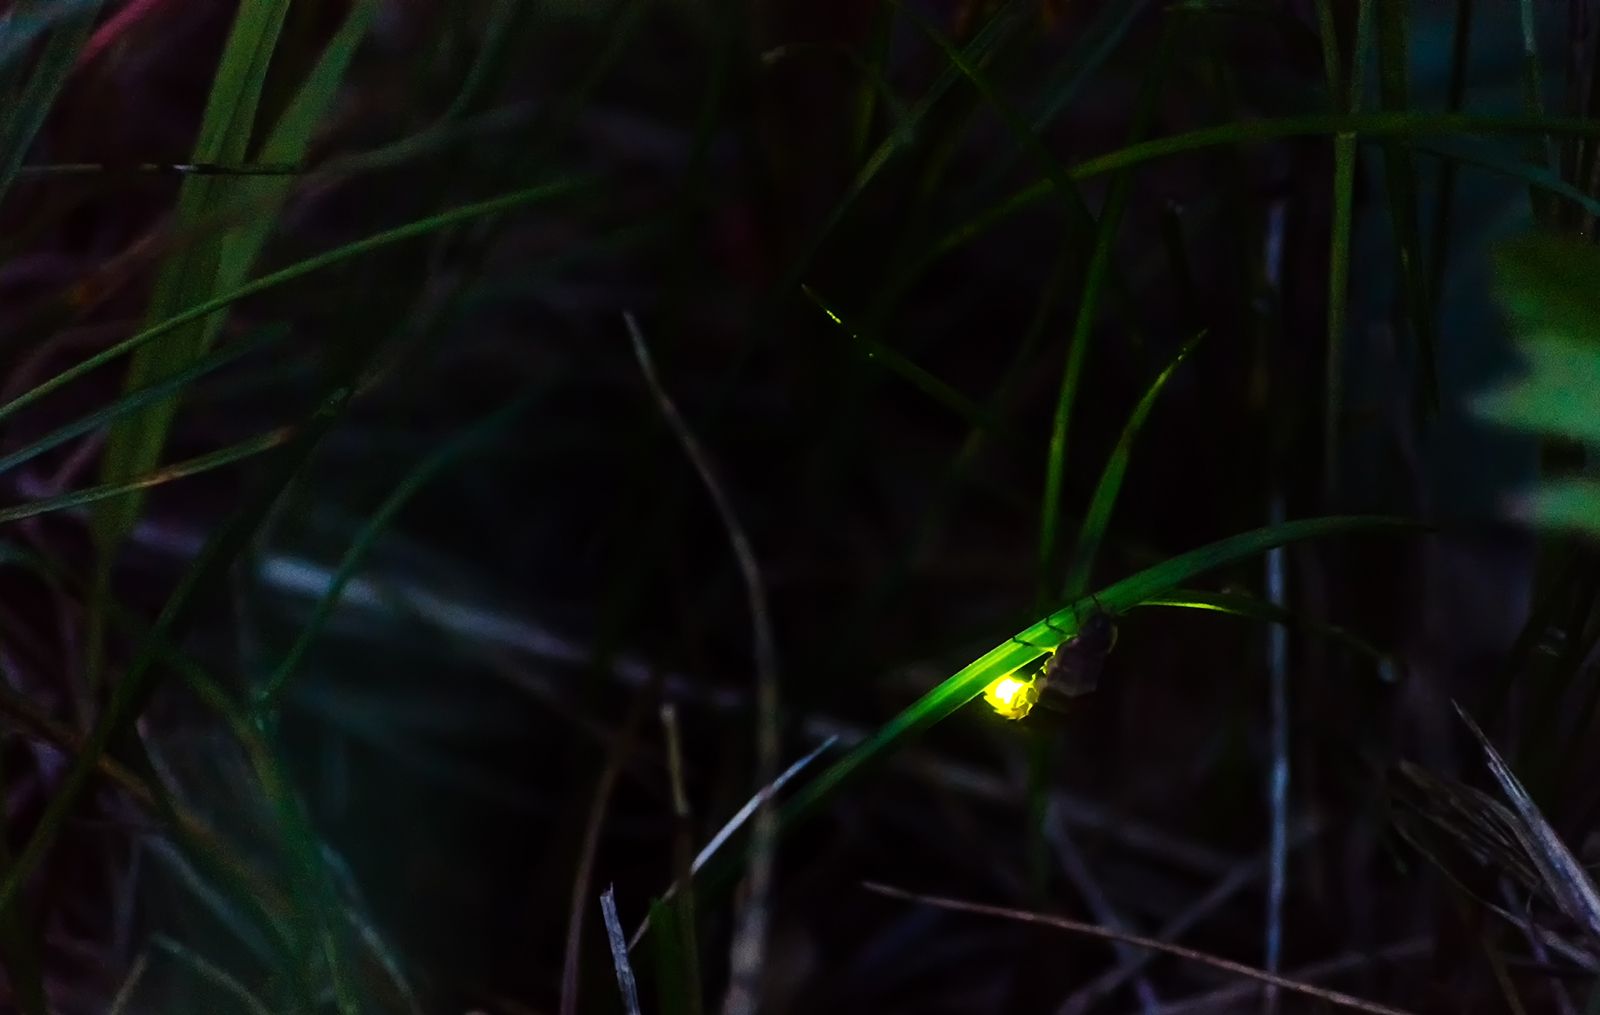 Image of a Common Glow-worm glowing on a blade of grass at night.